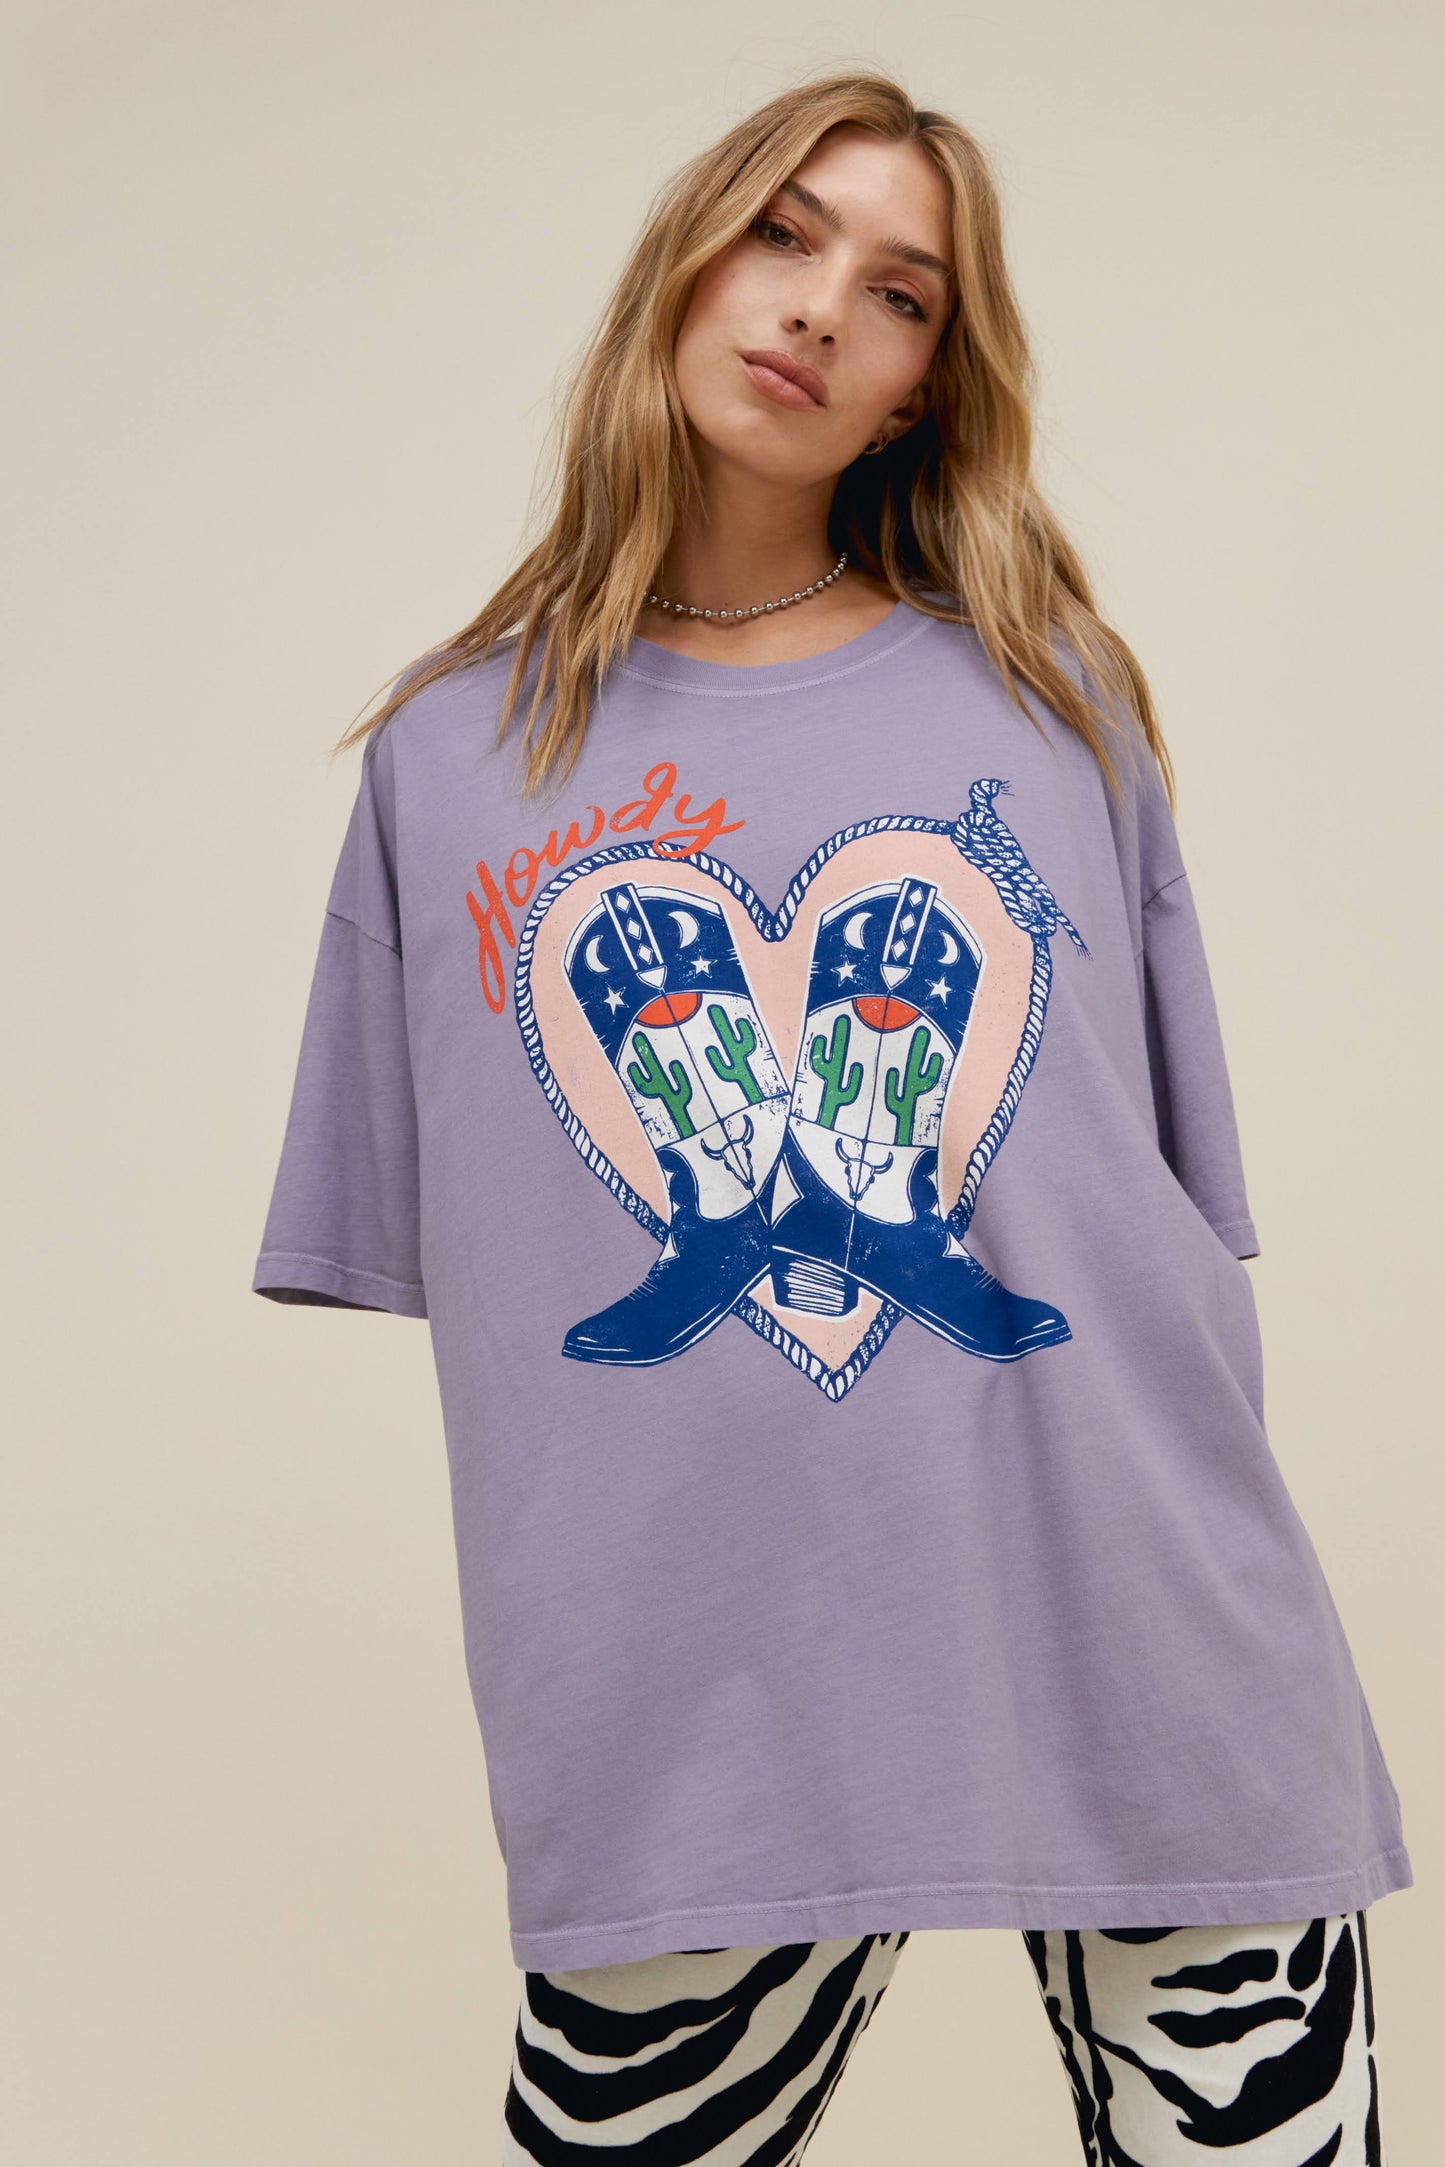 Howdy Boots OS Tee